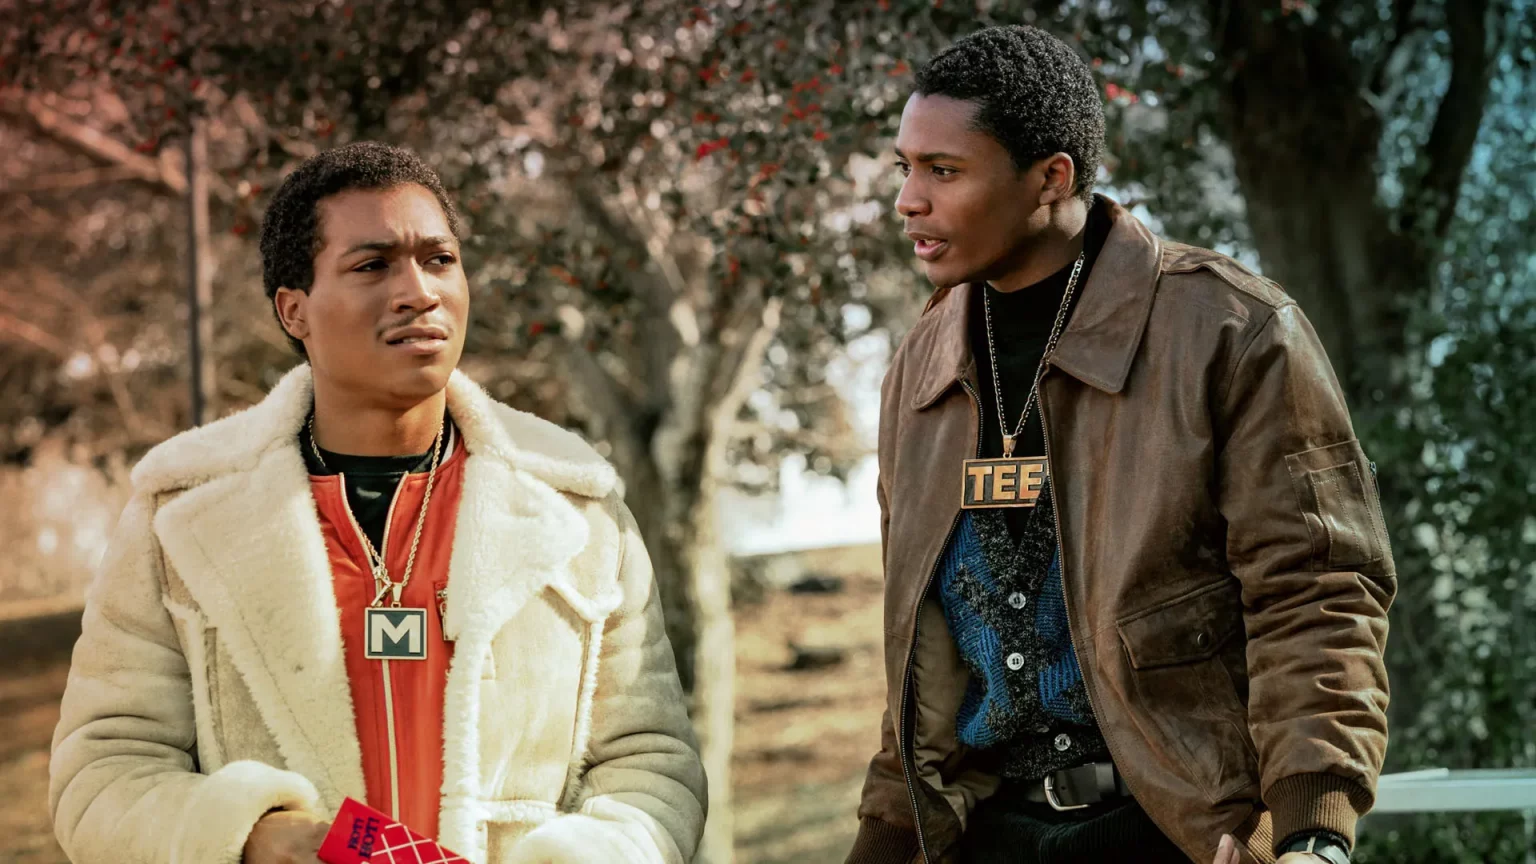 Young Terry and Meech in the show, Black Mafia Family (Credits: Starz)